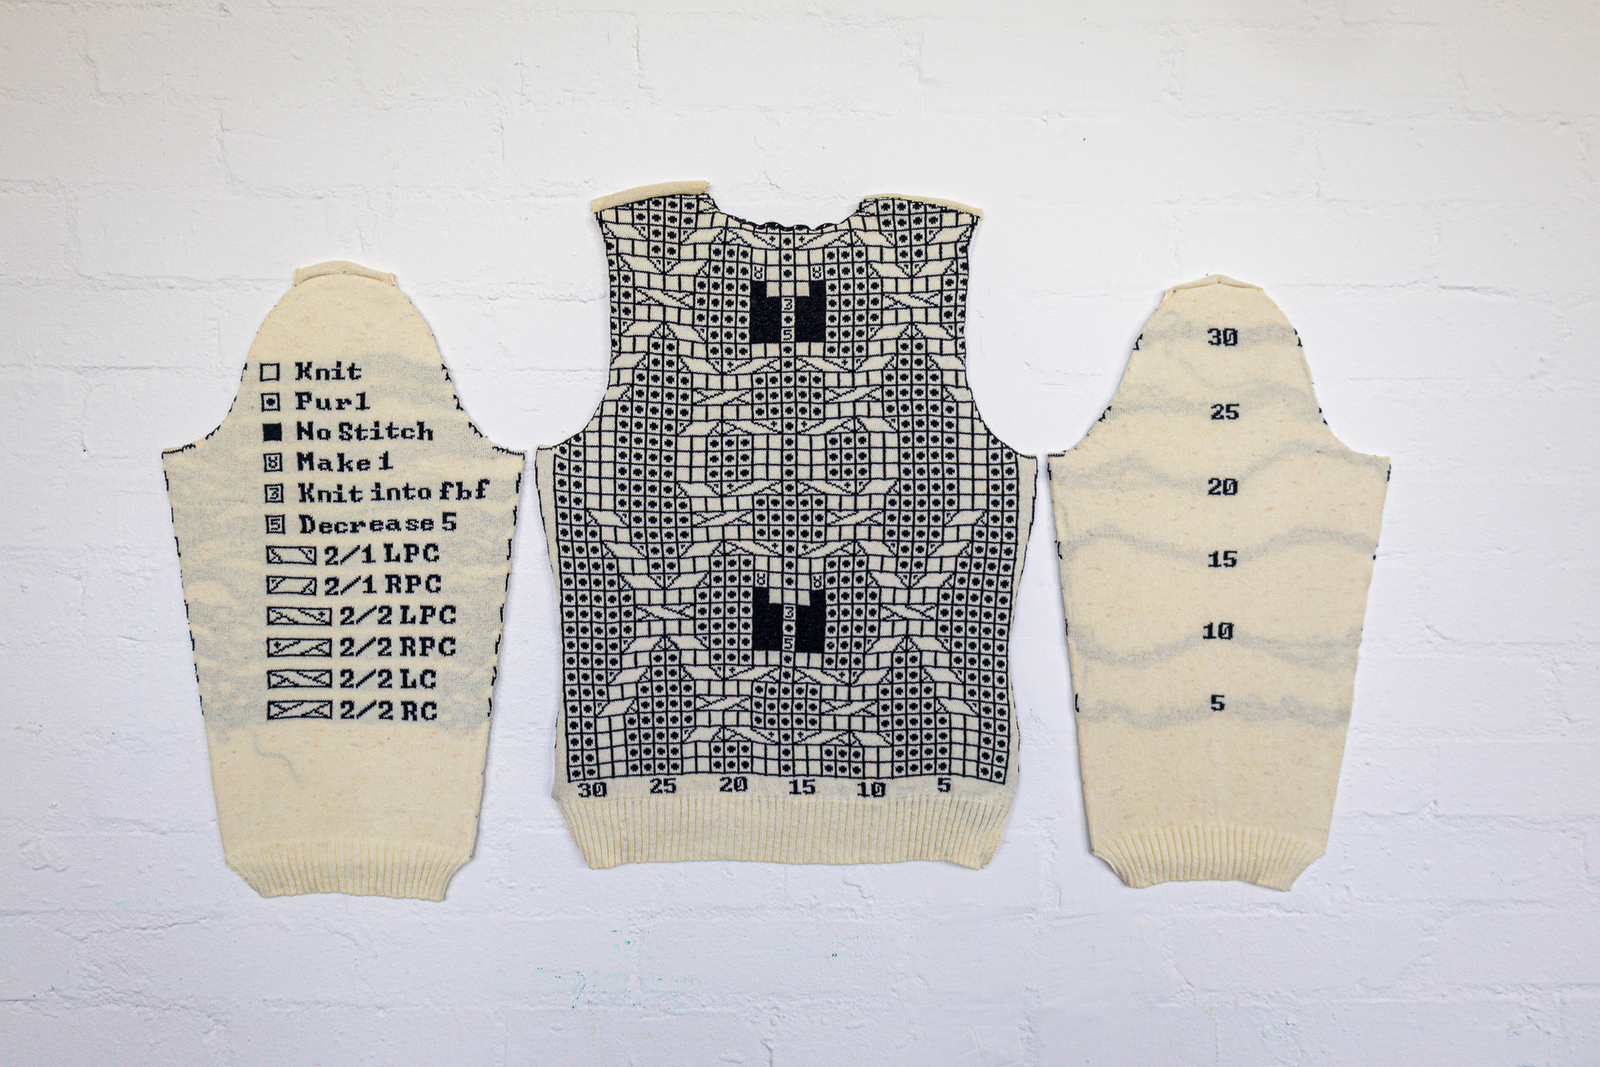 Machine knitted, shaped pattern pieces with gridded images on top